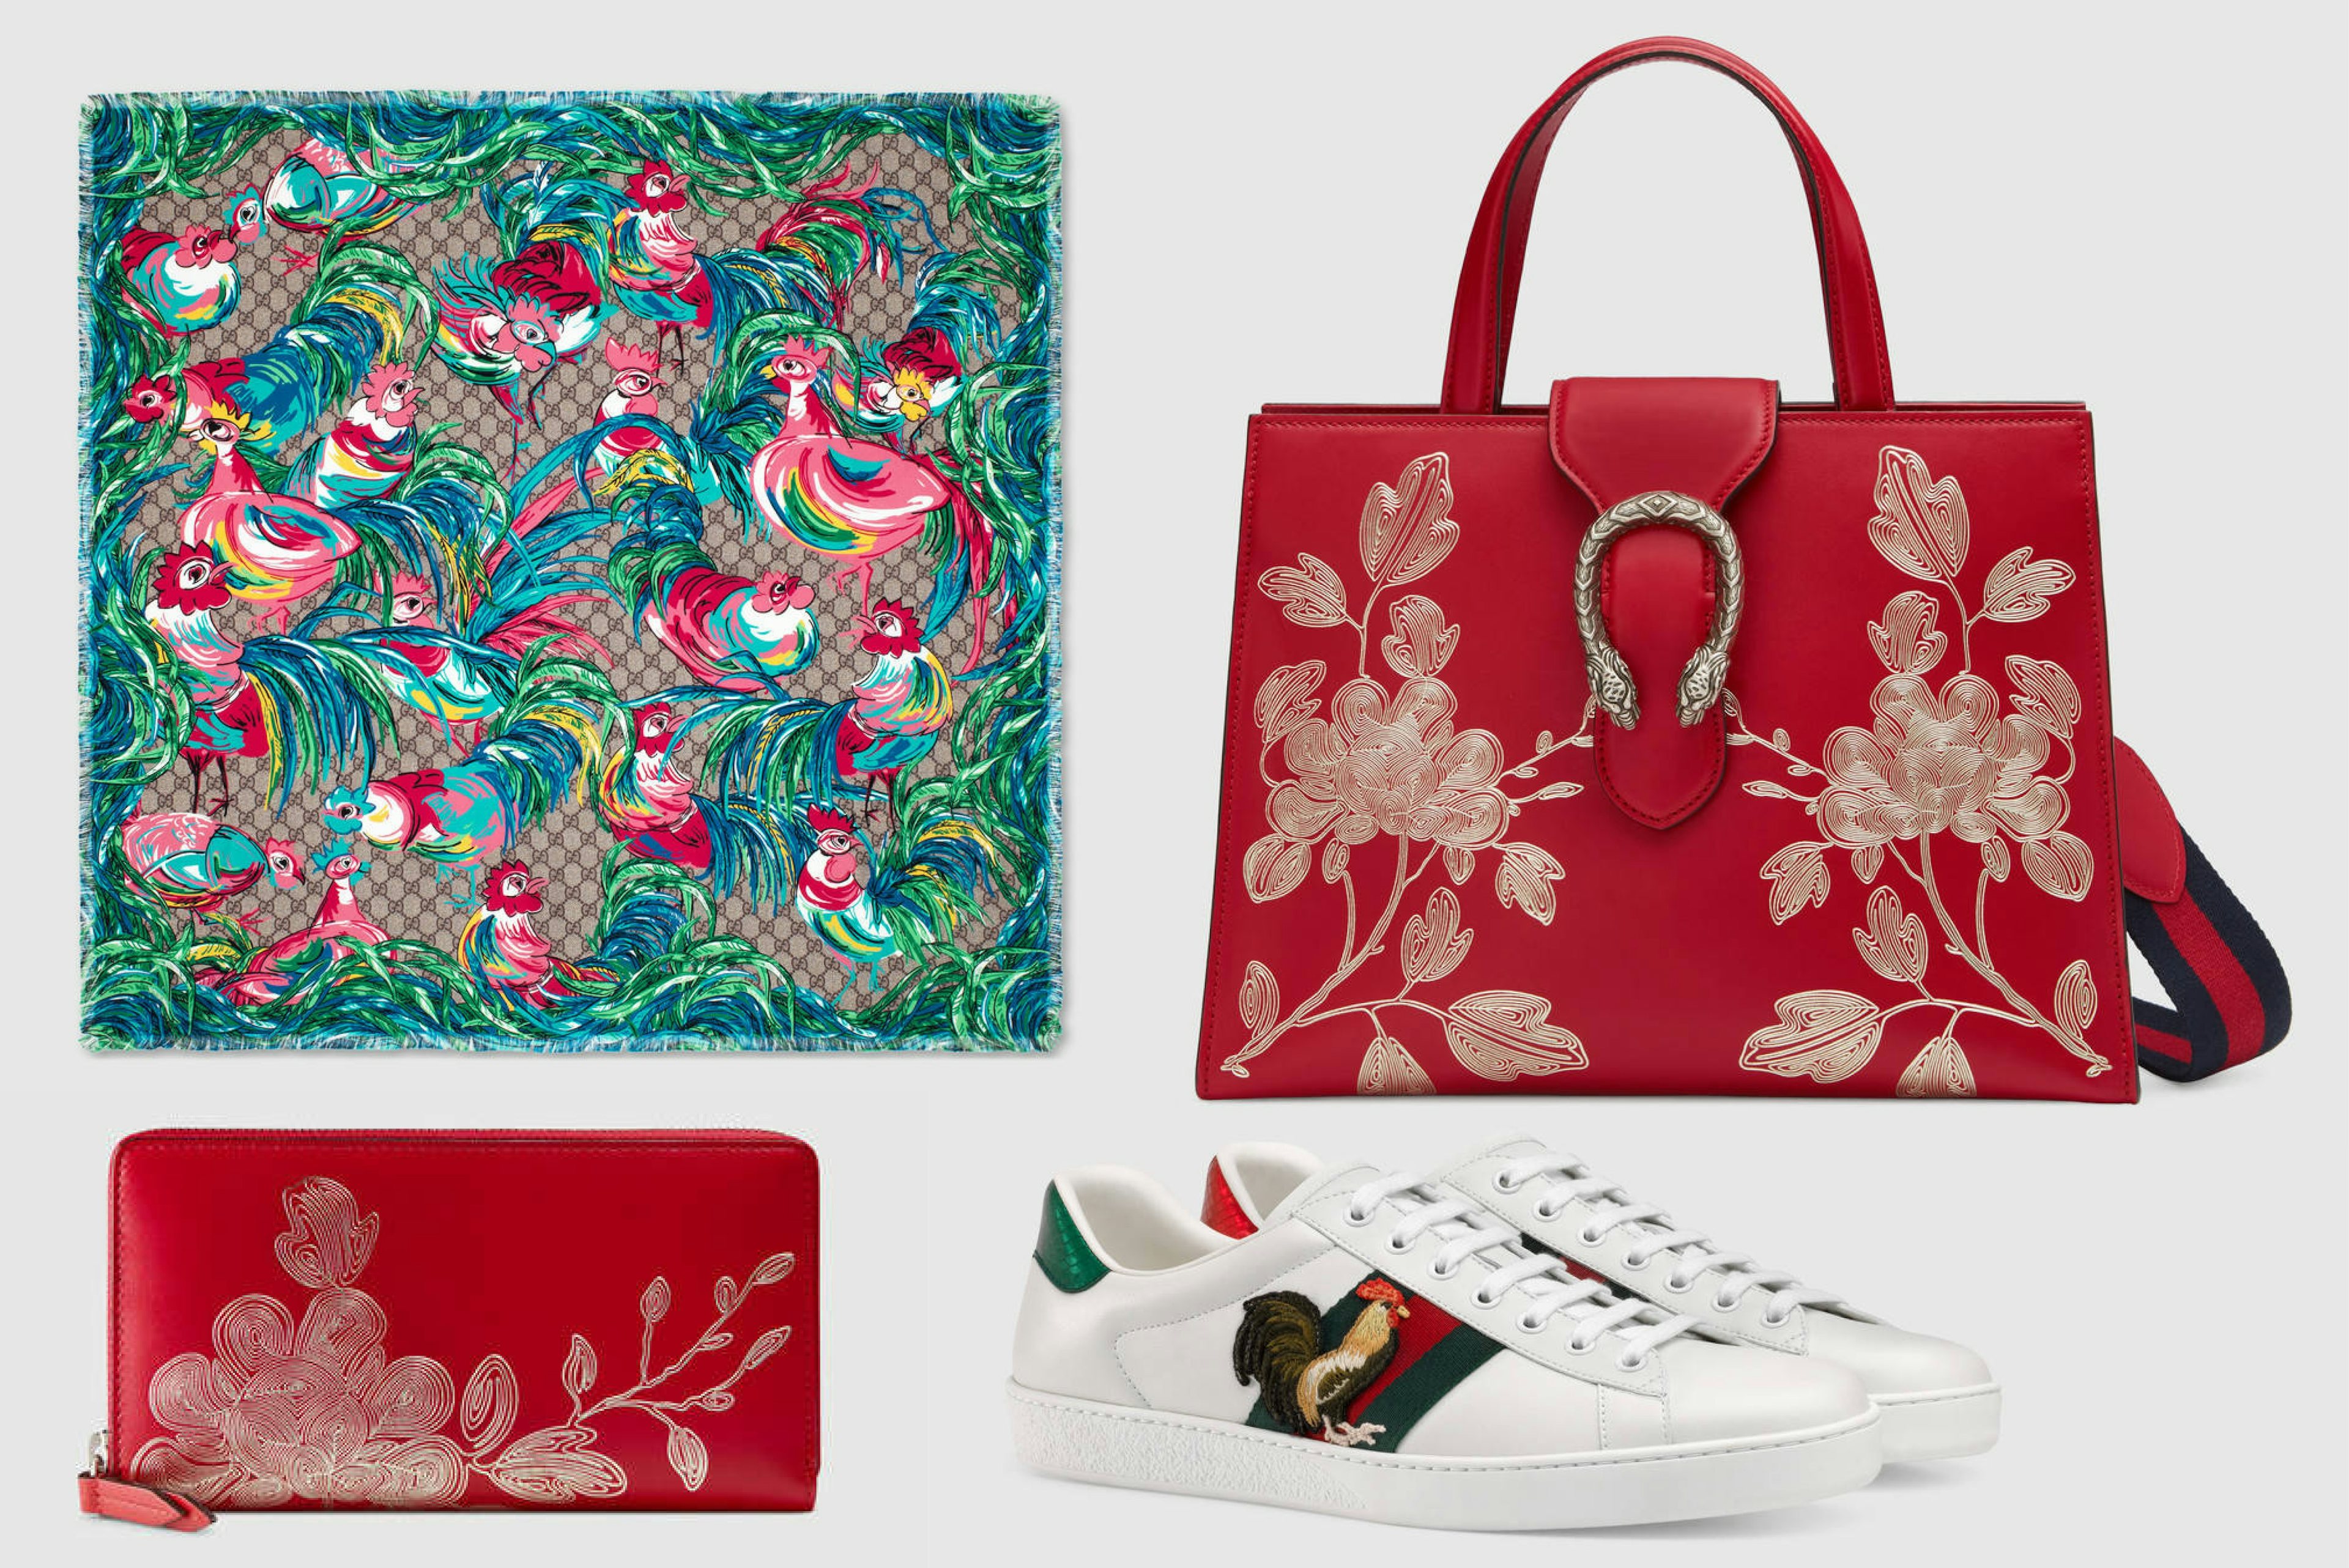 Gucci released a collection of several items for Chinese New Year, including a handbag, scarf, wallet, and sneakers. 